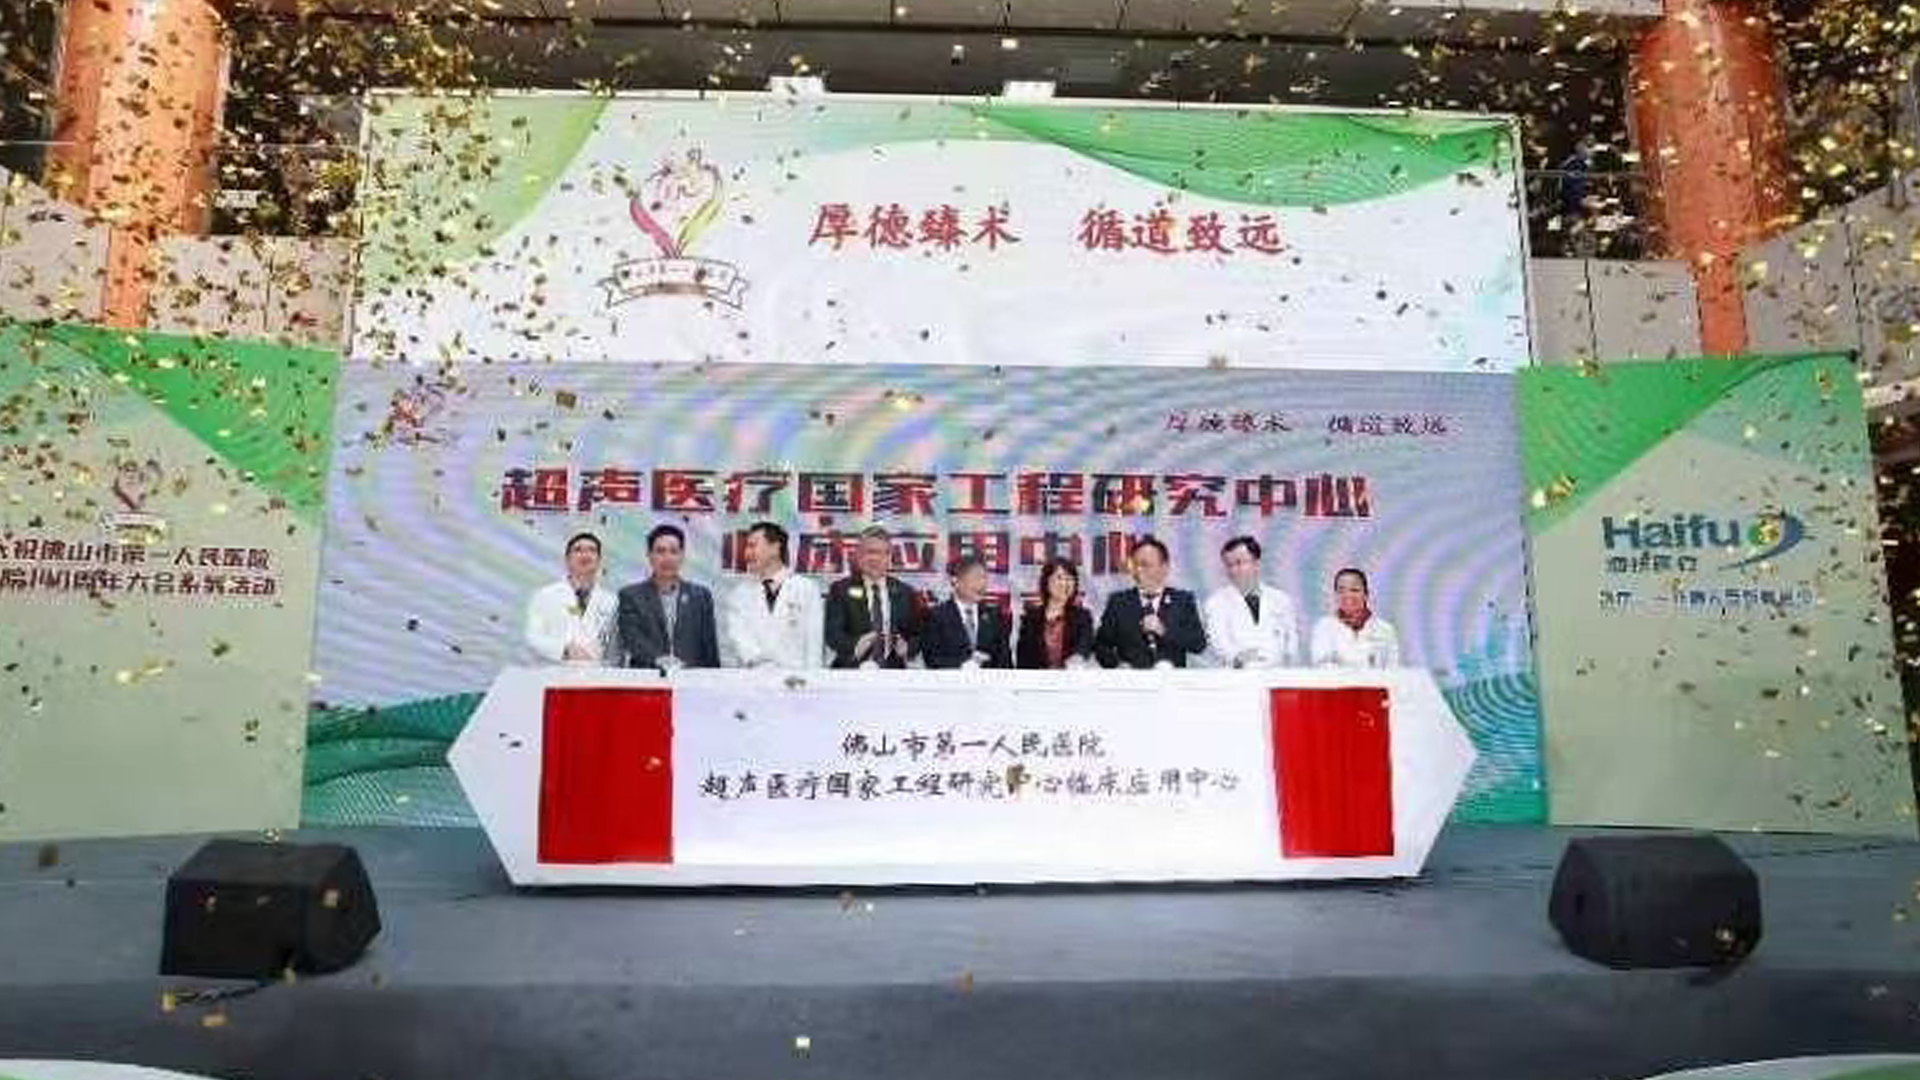 The Grand Opening Event of The Uterine Medical center in Guangzhou Foshan_2